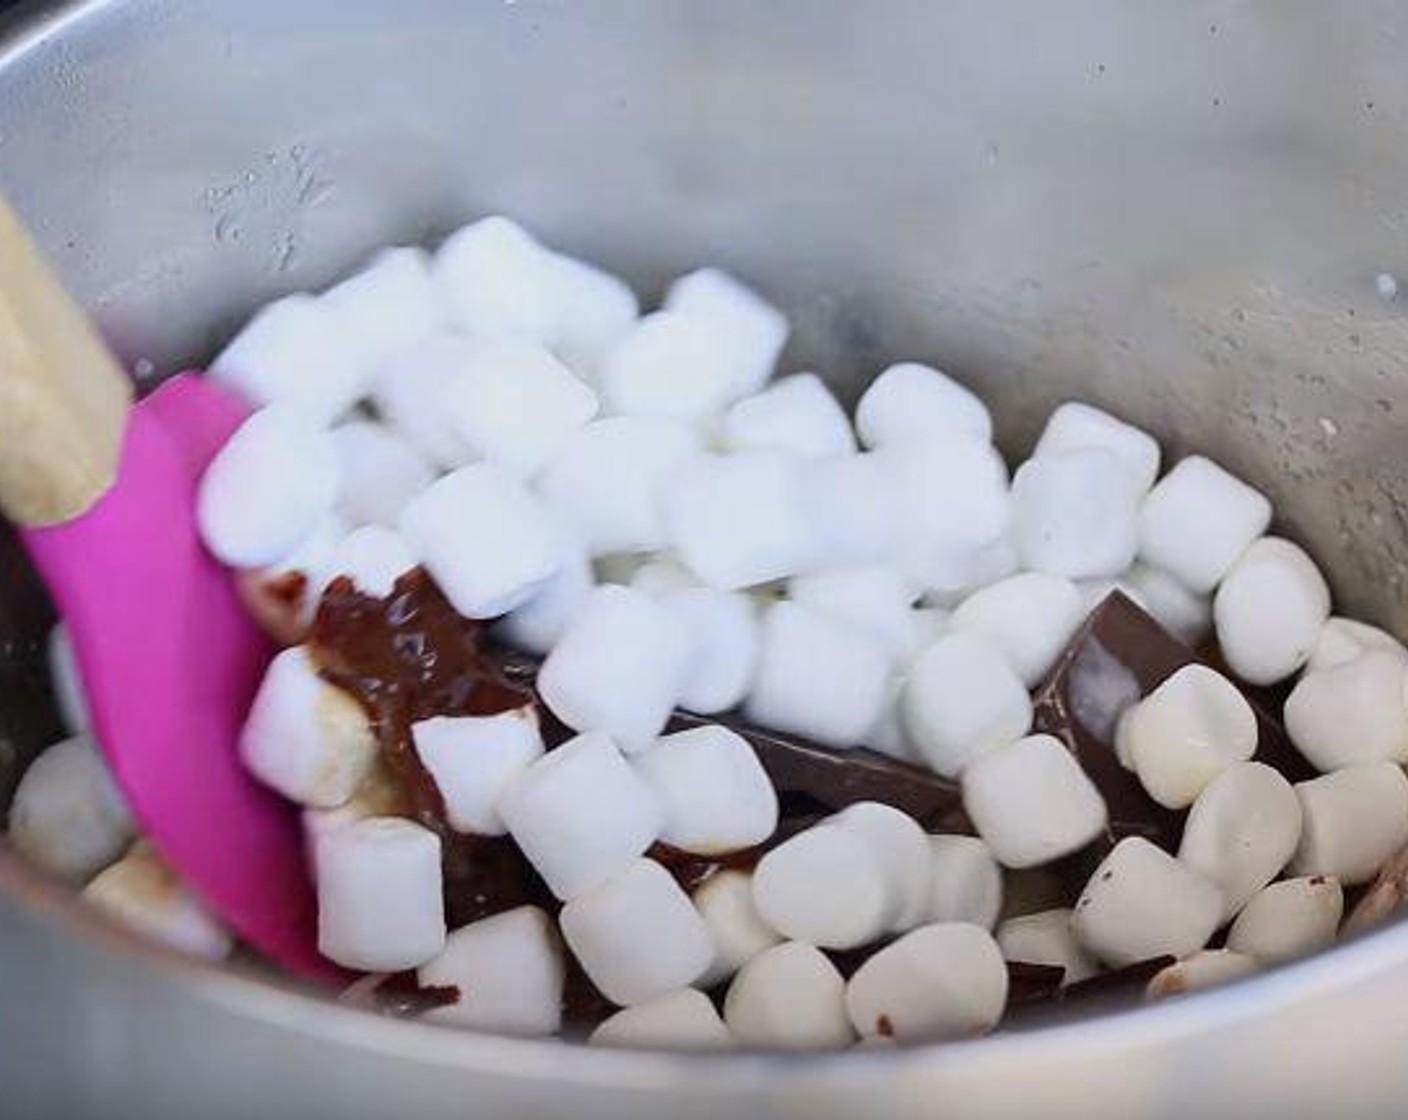 step 3 Remove from heat, stir in Vanilla Extract (1 tsp), 72% Dark Chocolate (1 cup), Almonds (1/2 cup) and Mini Marshmallows (2 cups). Stir fast for 1 minute or until chocolate and marshmallows are melted.